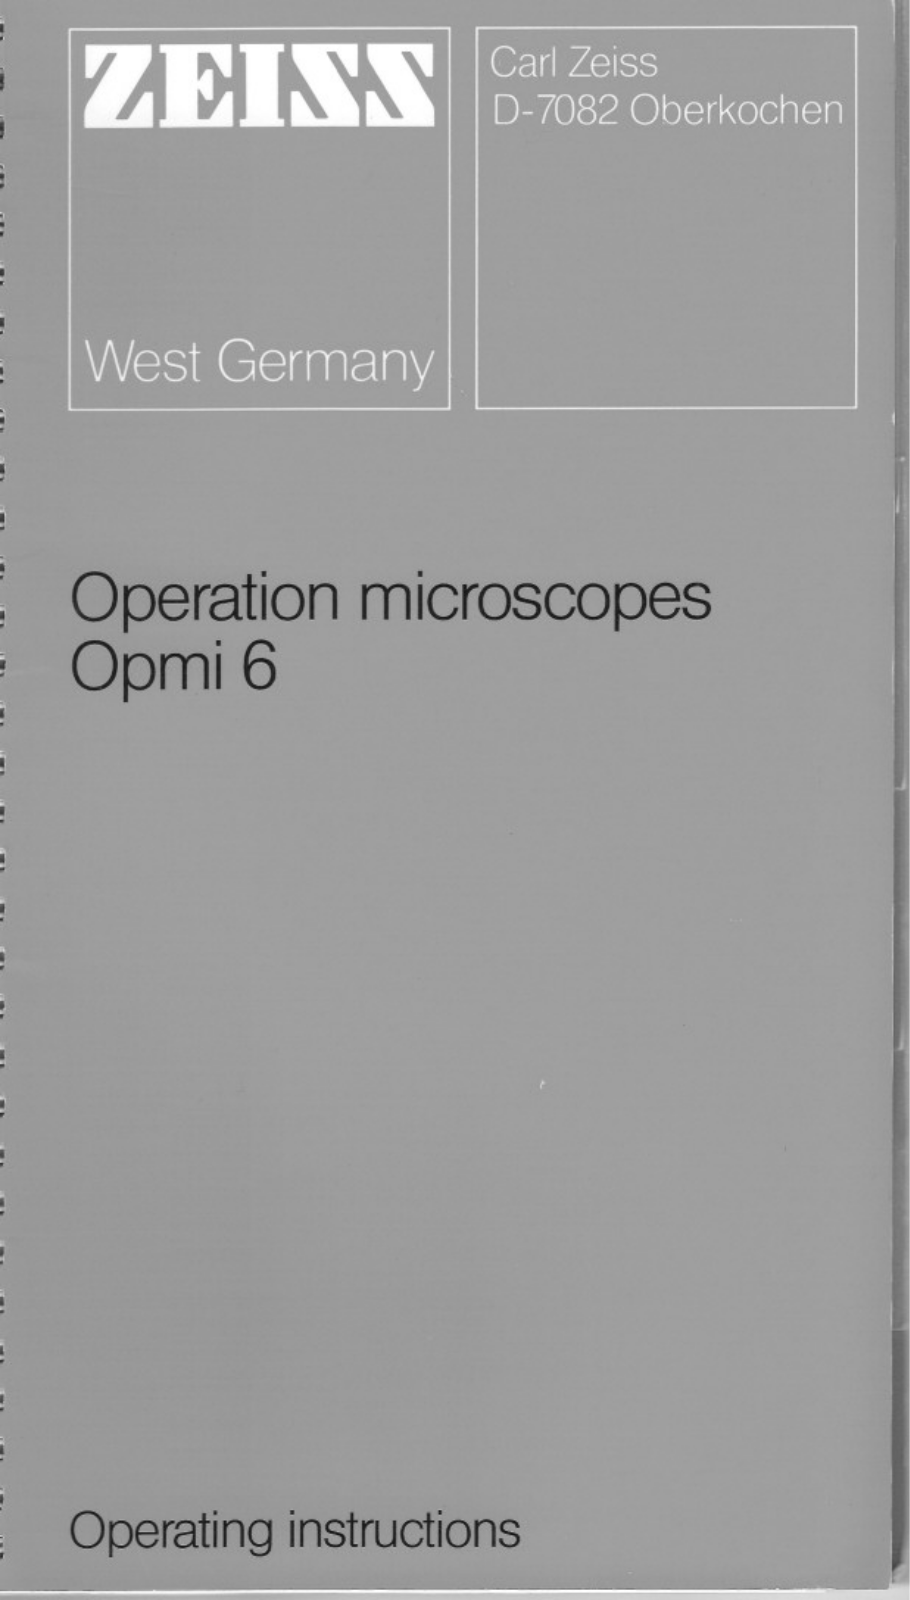 Zeiss OPMI 6 User Manual